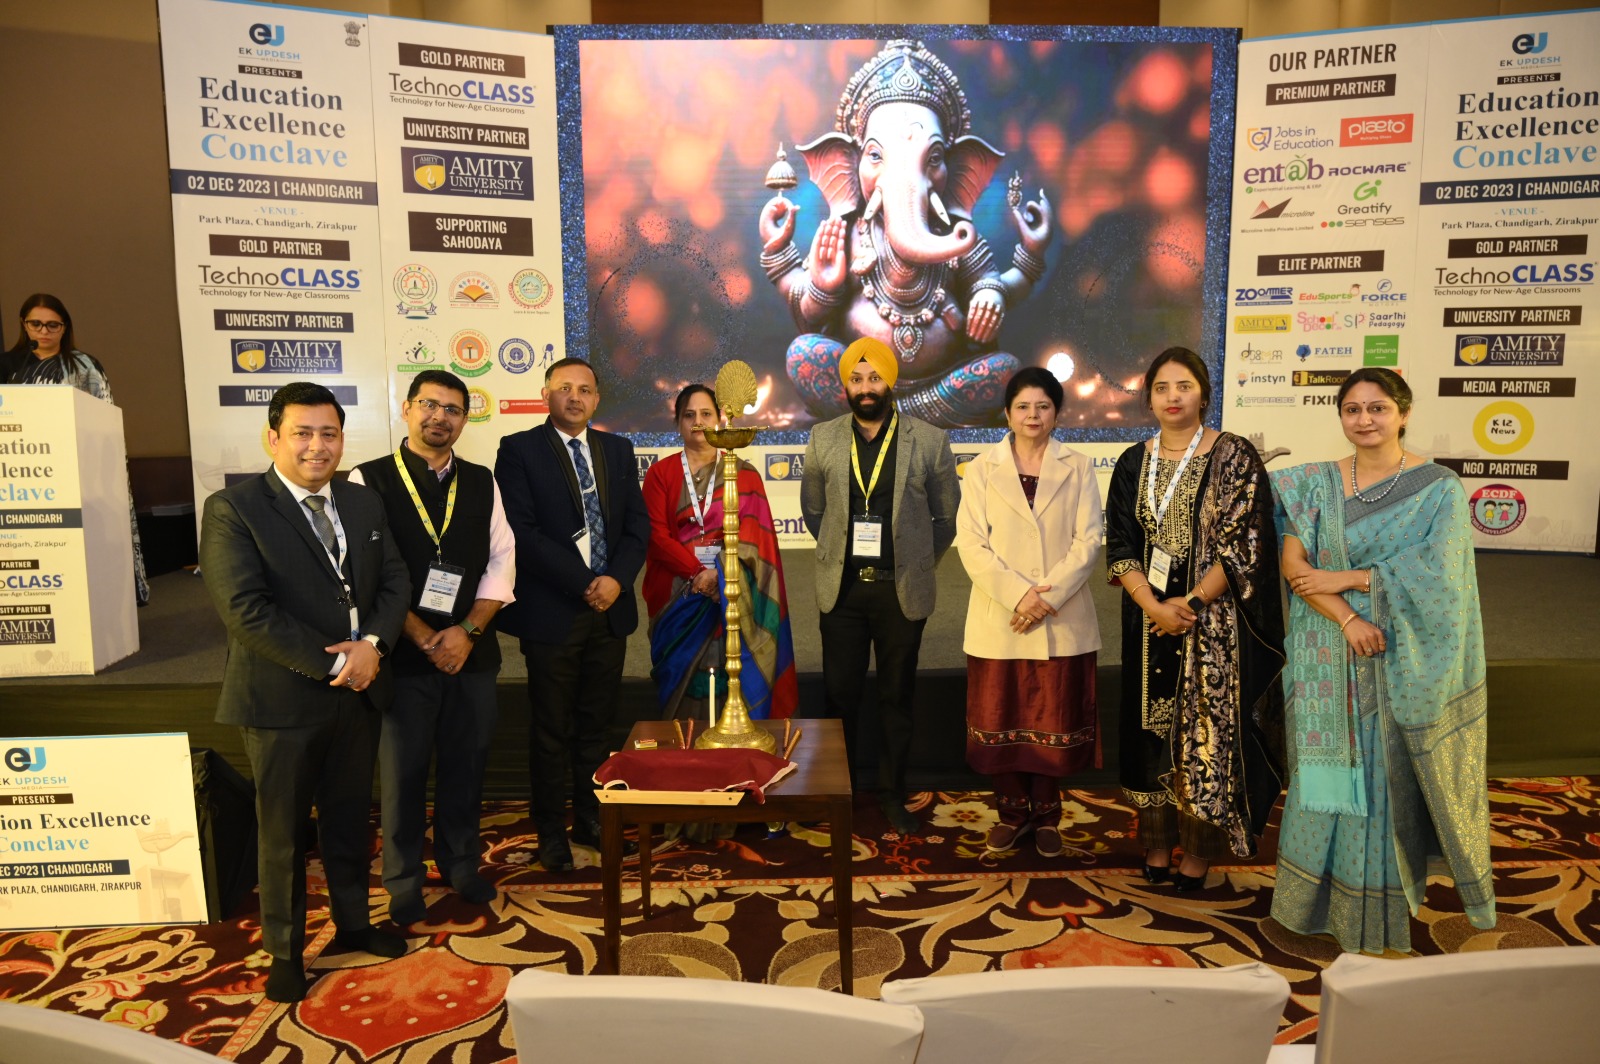 The ‘Education Excellence Conclave’ was held on 2nd Dec 2023 at the Park Plaza, Zirakpur, Chandigarh, and was organised by EK UPDESH Media